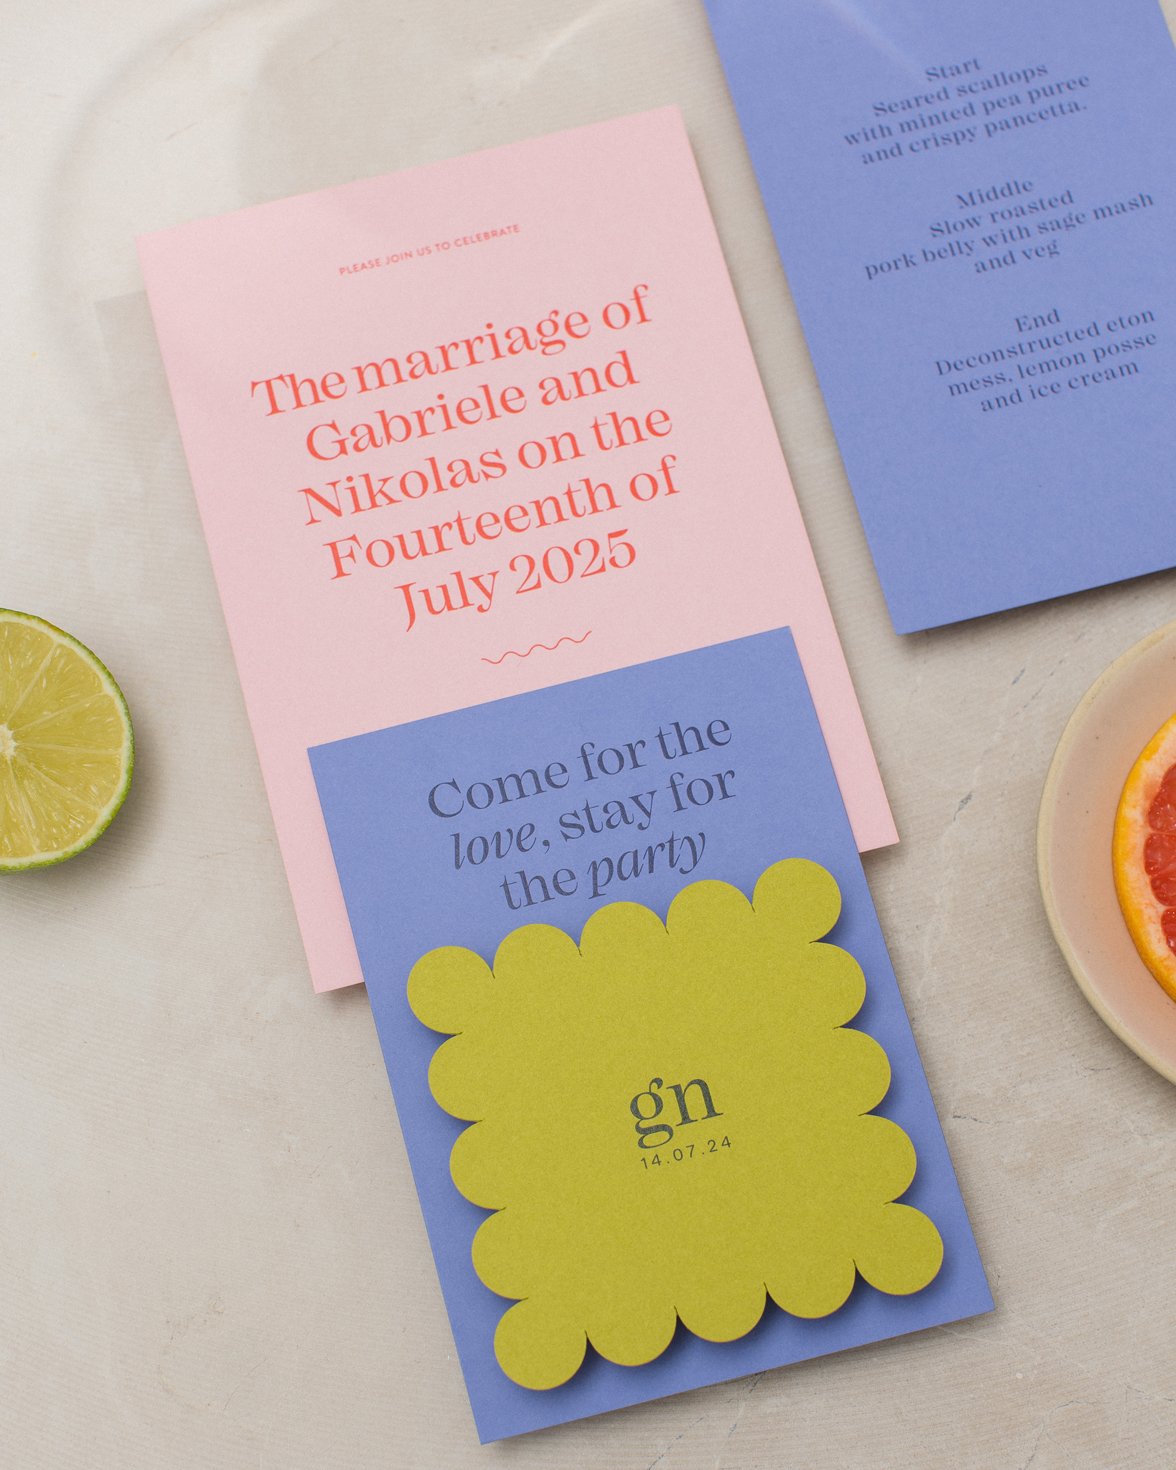 Pink and red wedding invitation bundle with modern bold typography. Purple wedding details card and citrus green name card/RSVP with scalloped edges.